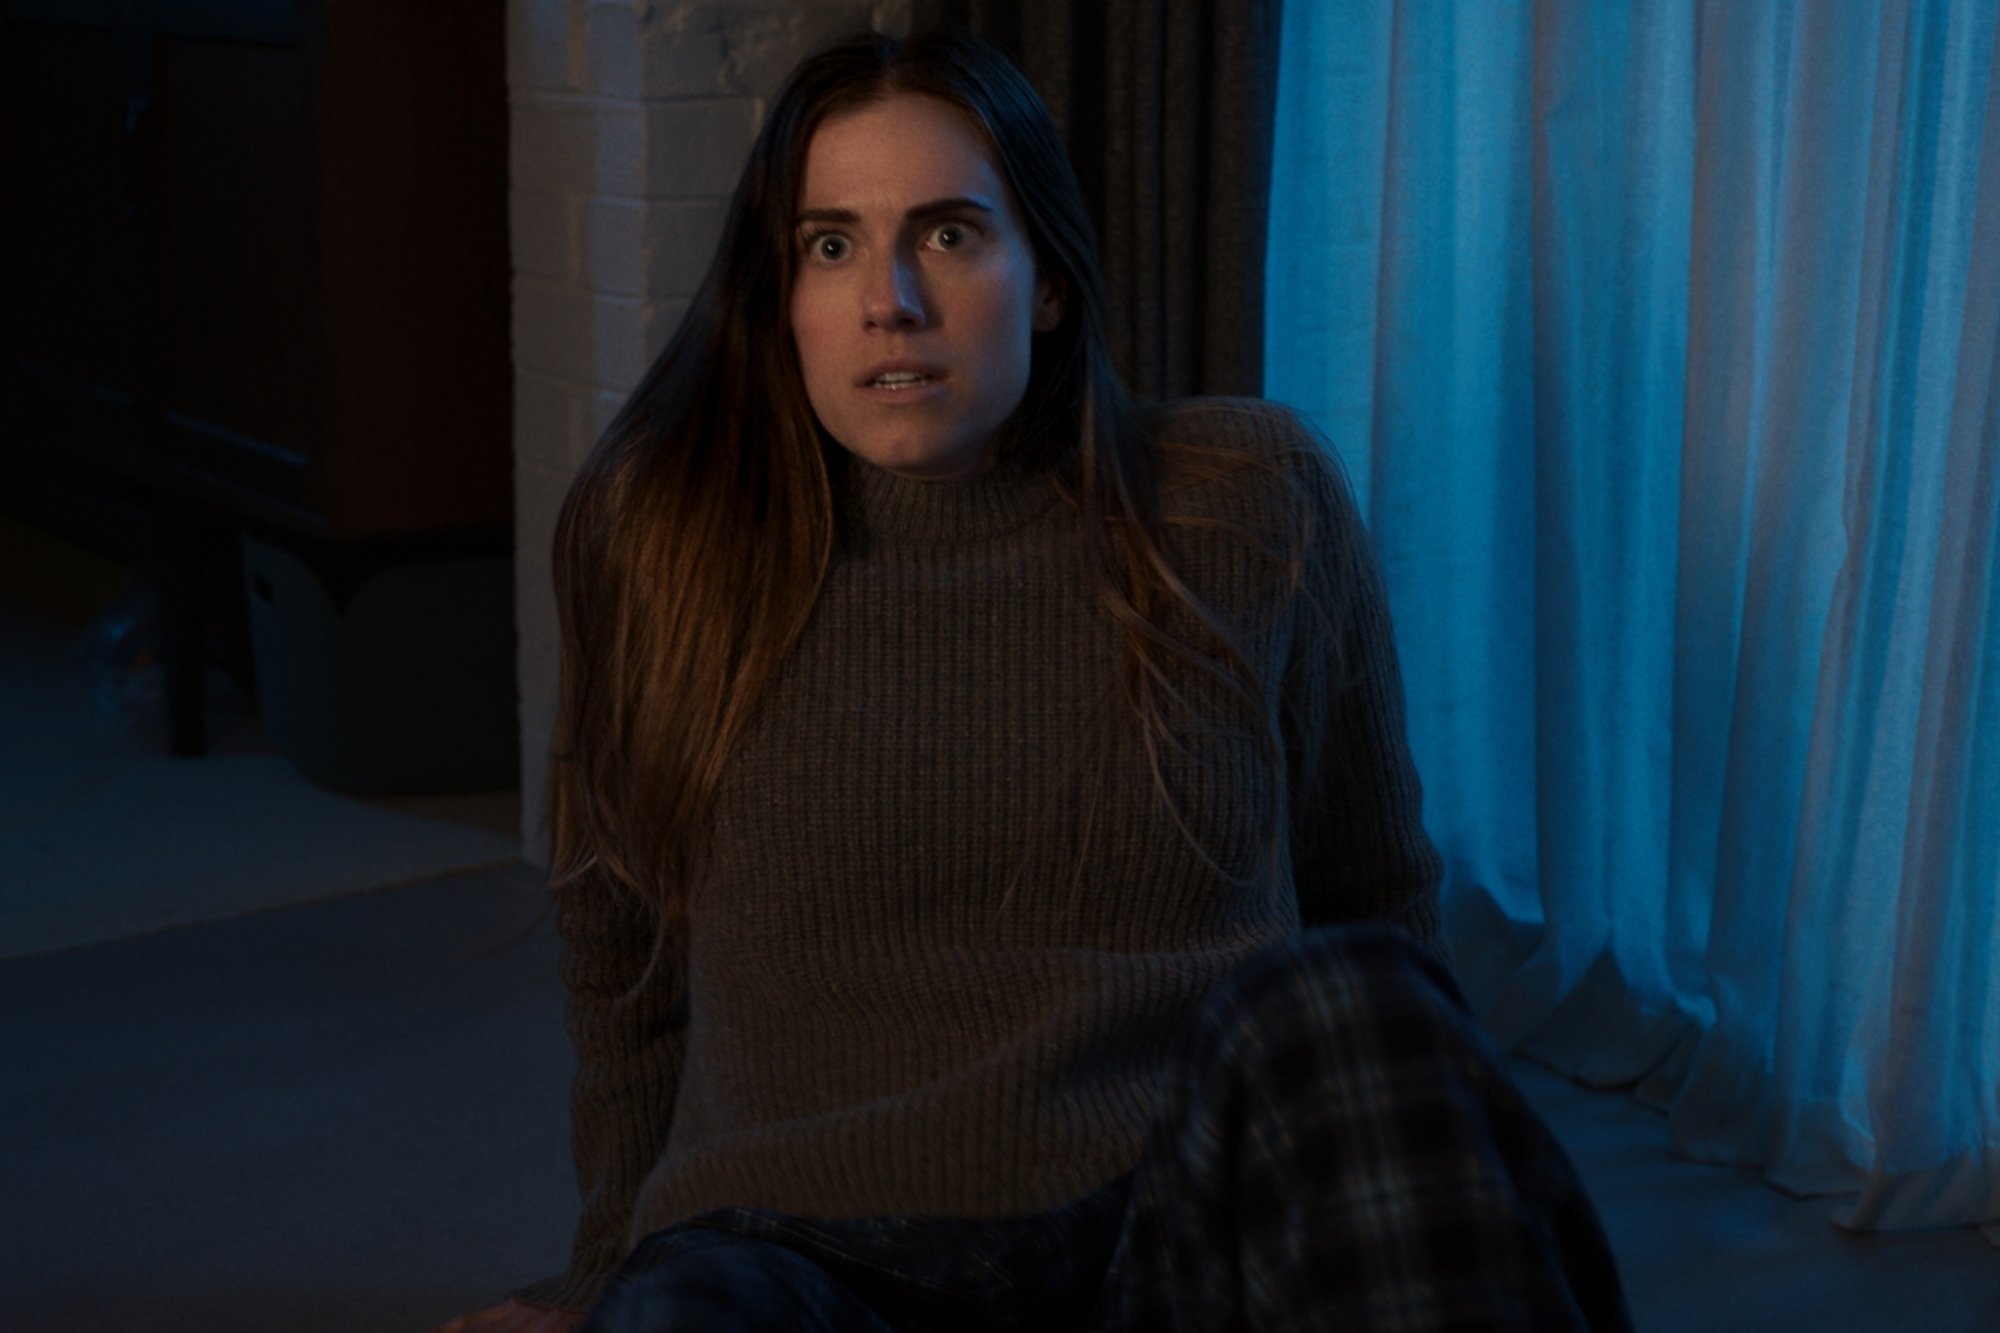 M3GAN: Allison Williams as Gemma sitting on the ground in front of curtains, looking terrified